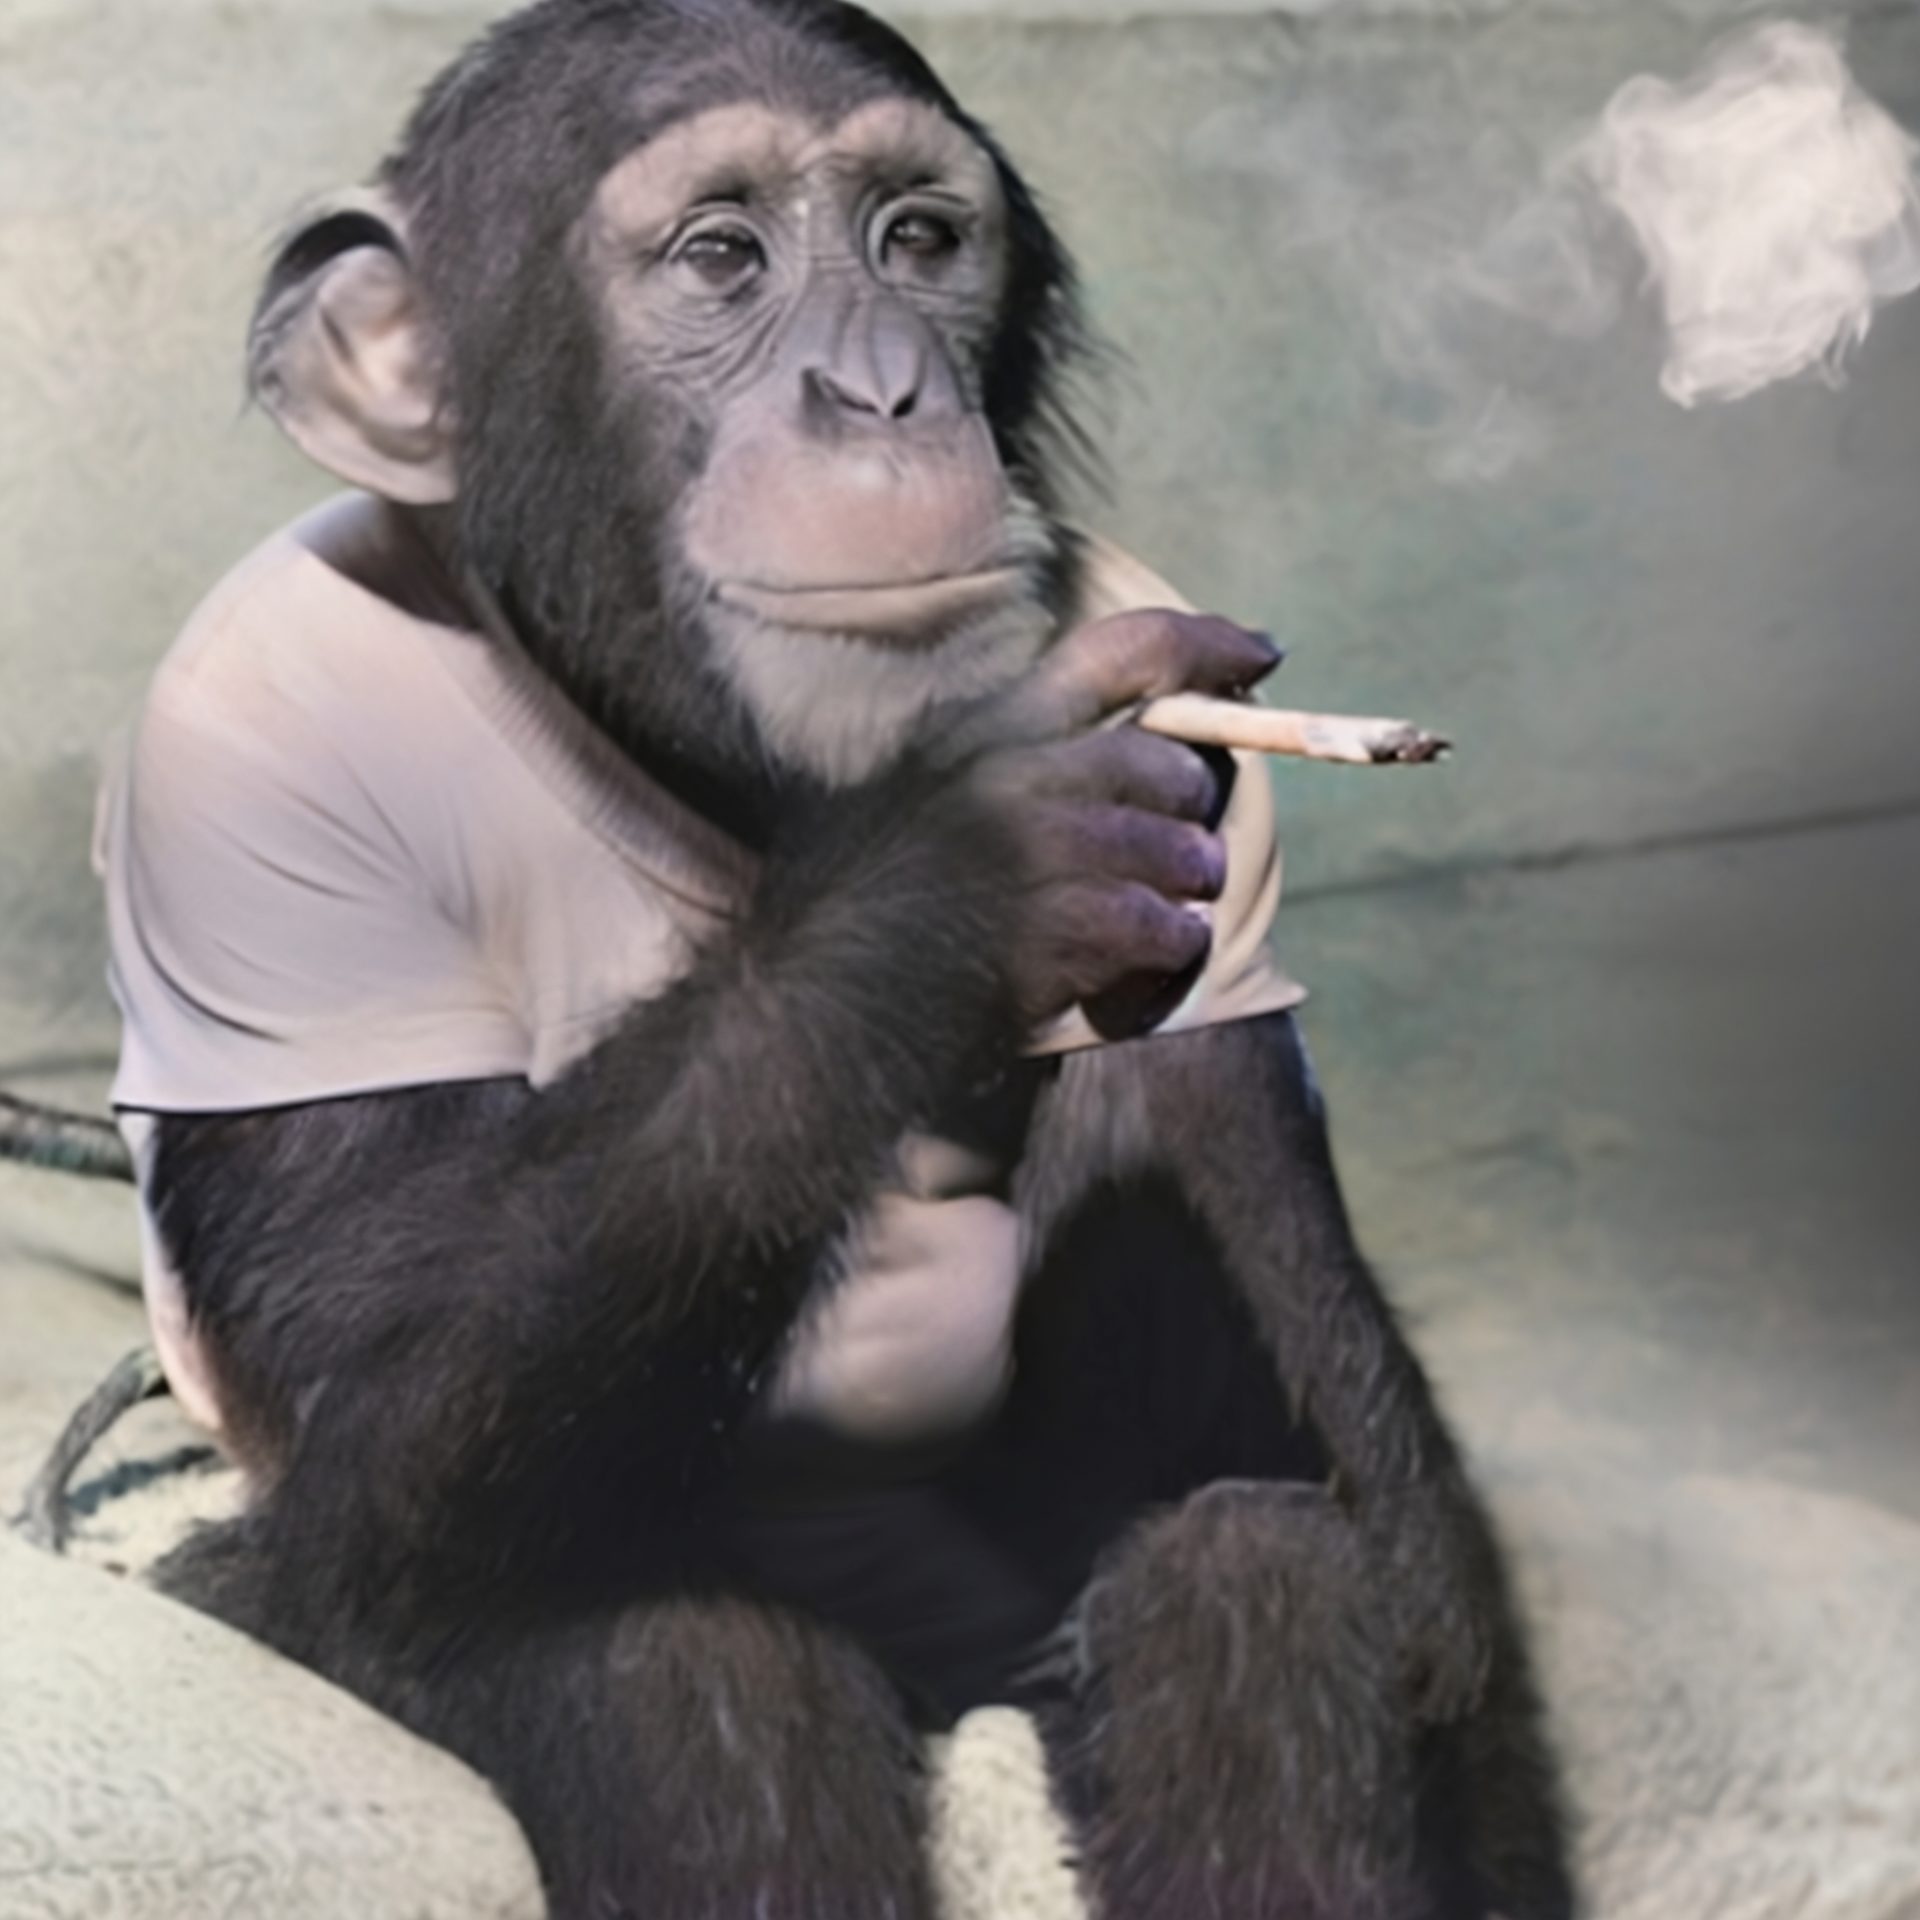 Chimp in t-shirt smoking a joint